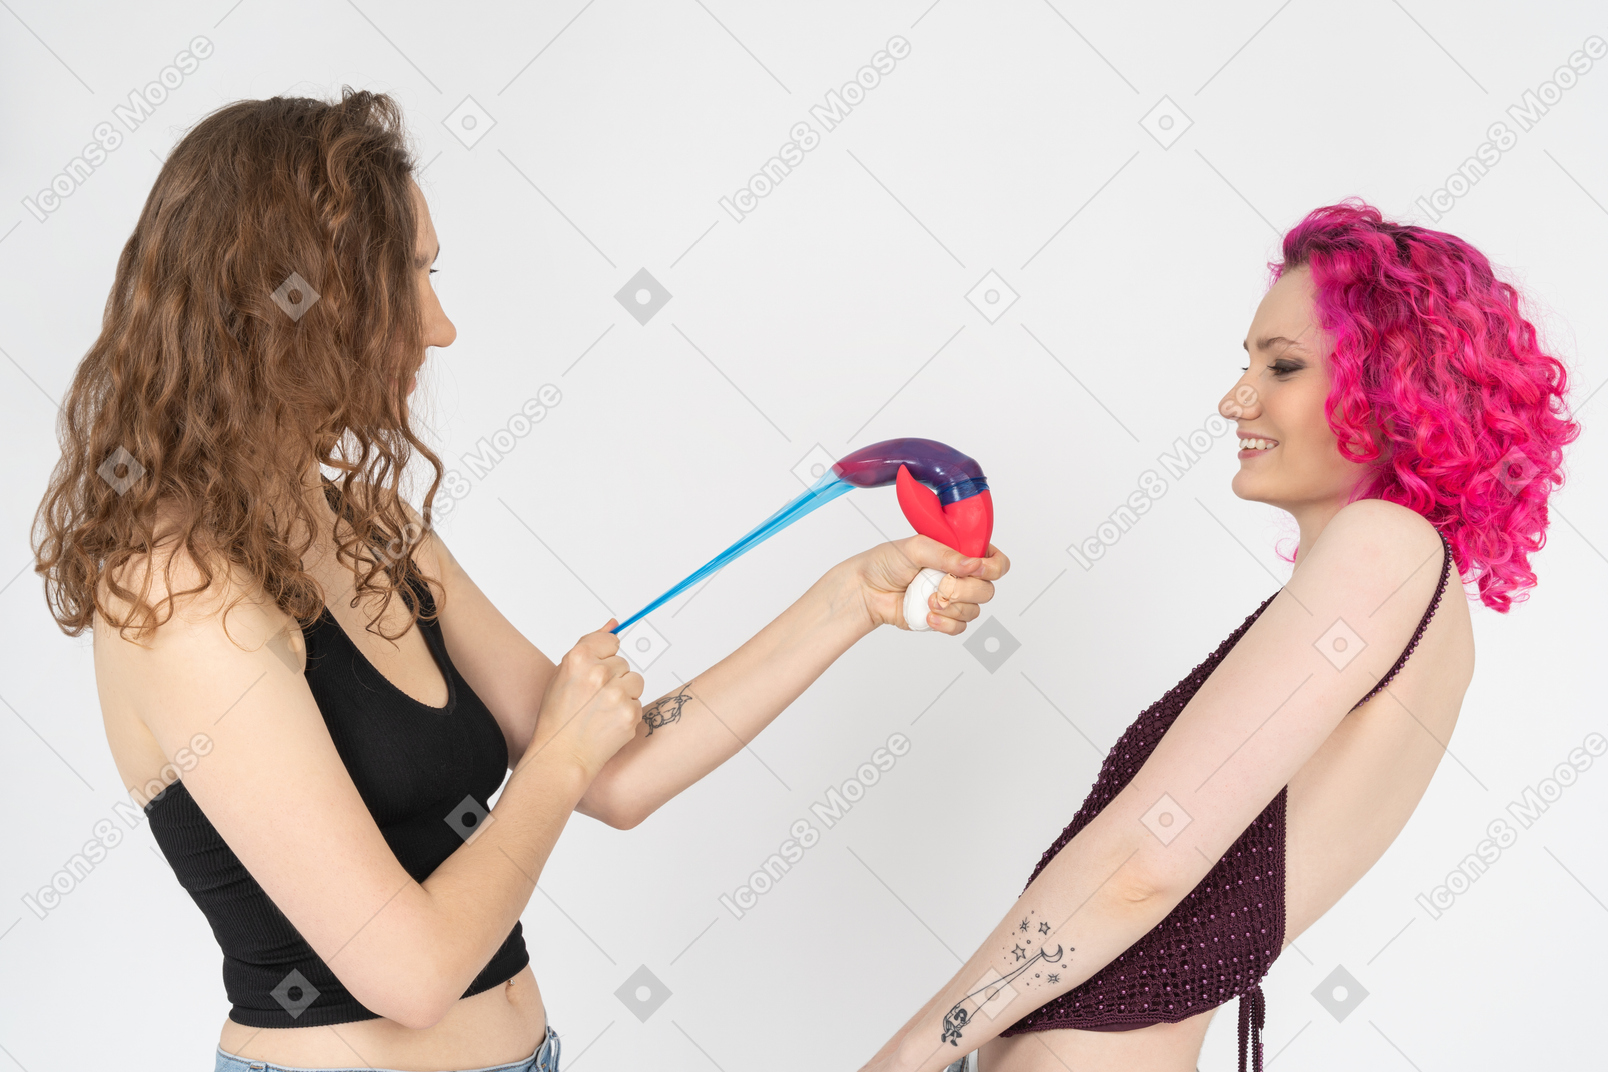 Young girl threatening her sister